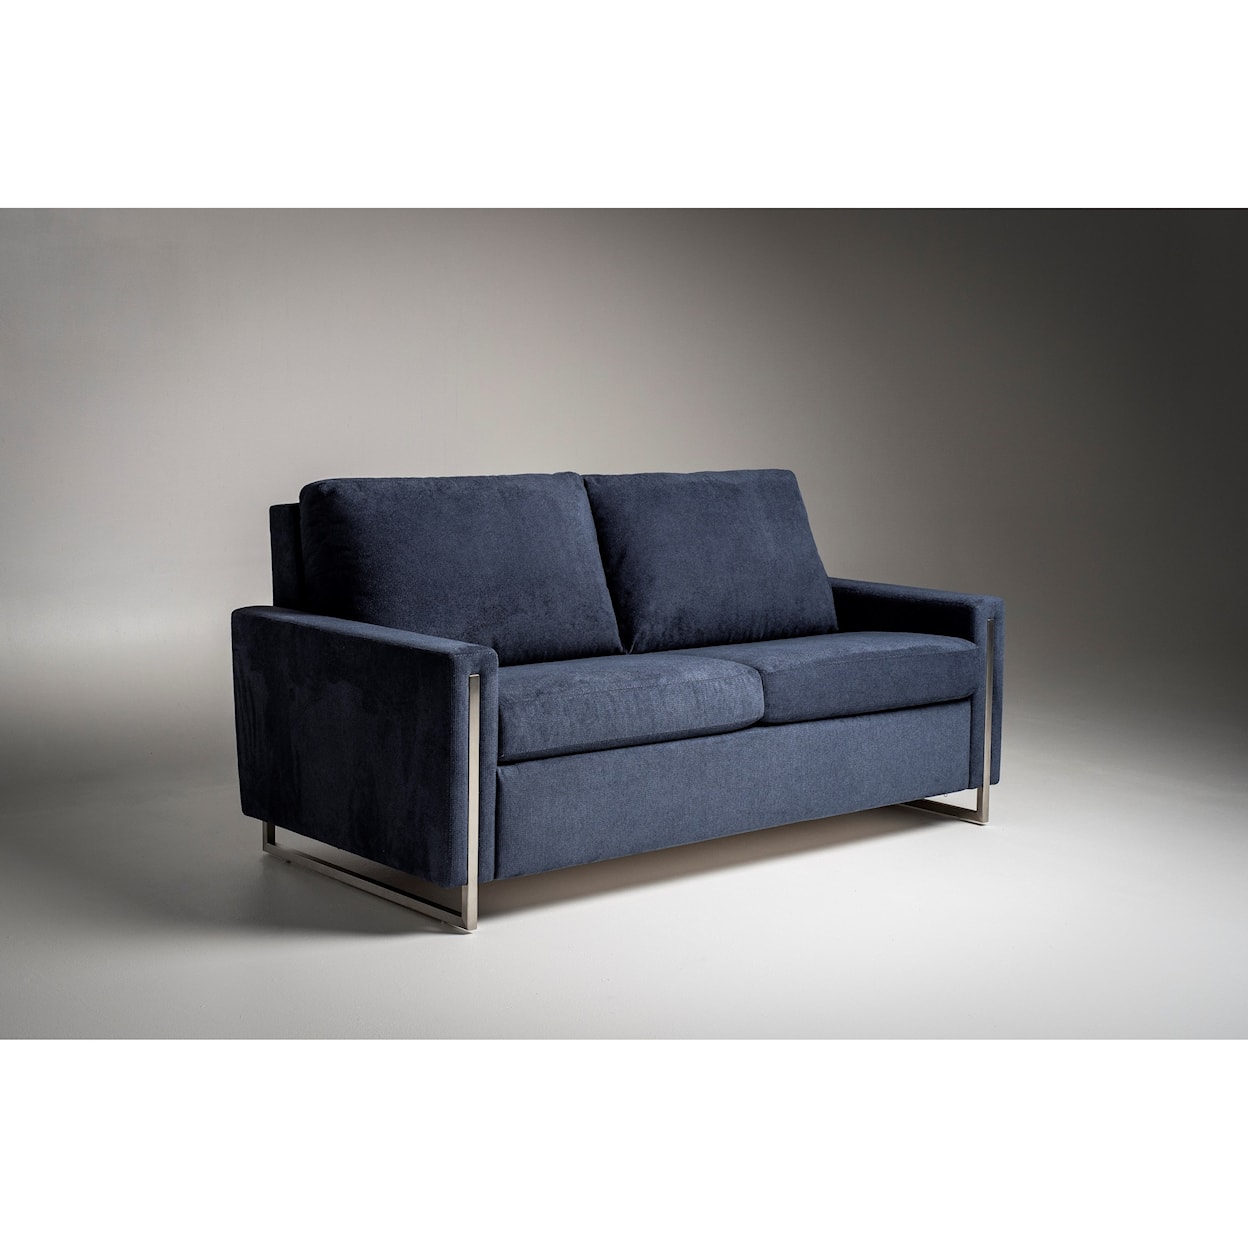 American Leather Sulley Queen Sofa Sleeper